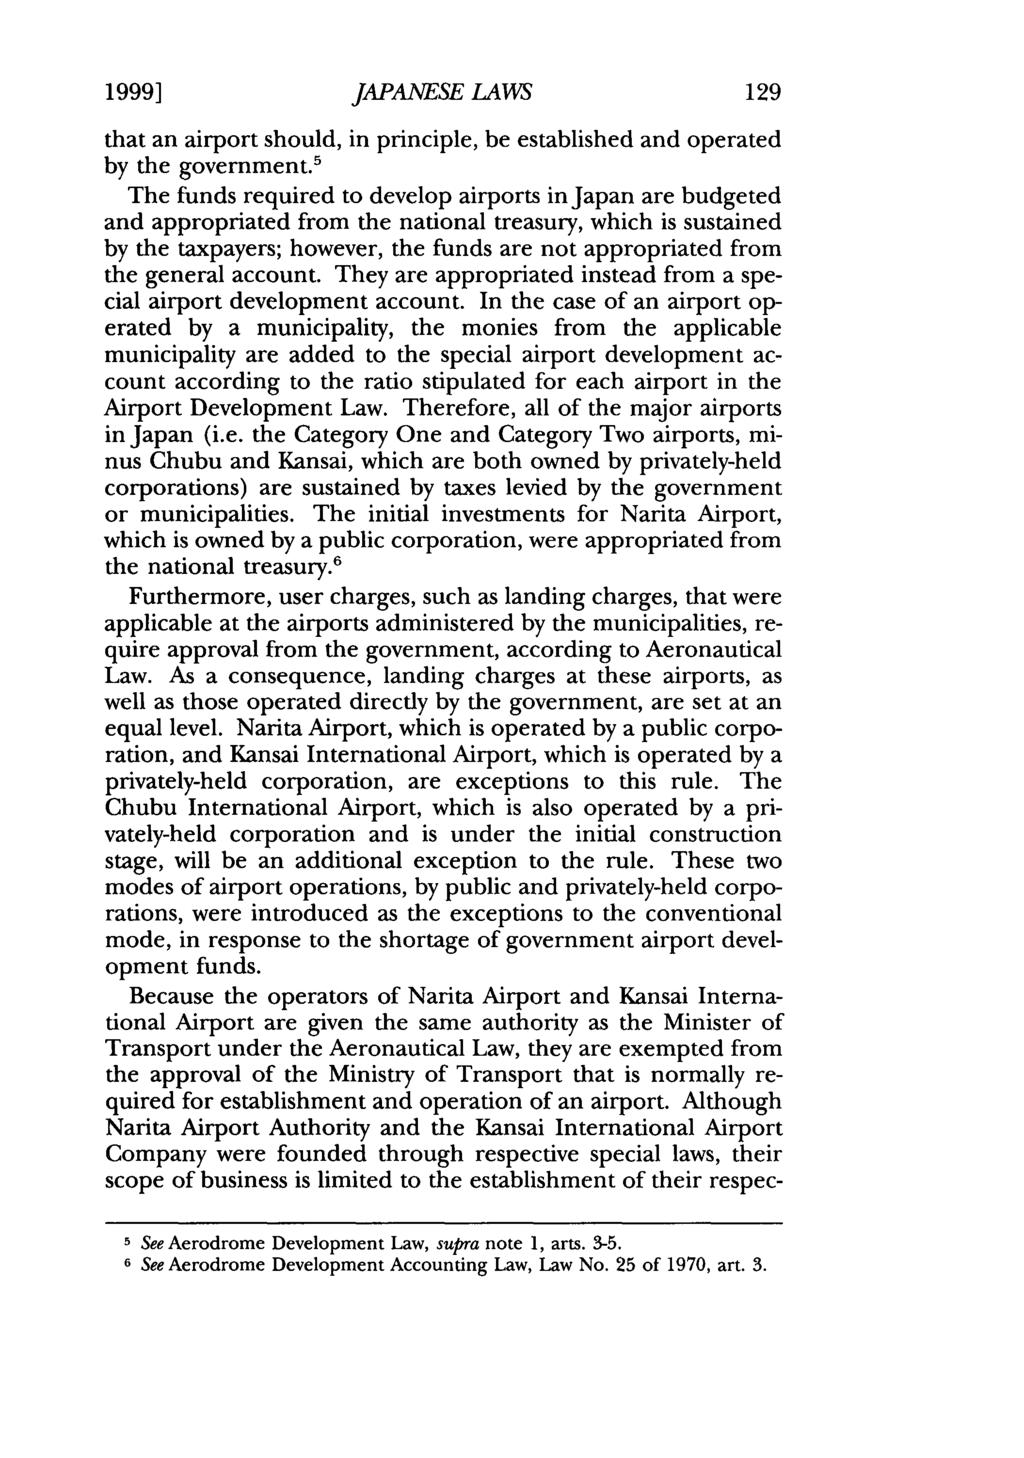 1999] JAPANESE LAWS that an airport should, in principle, be established and operated by the government.